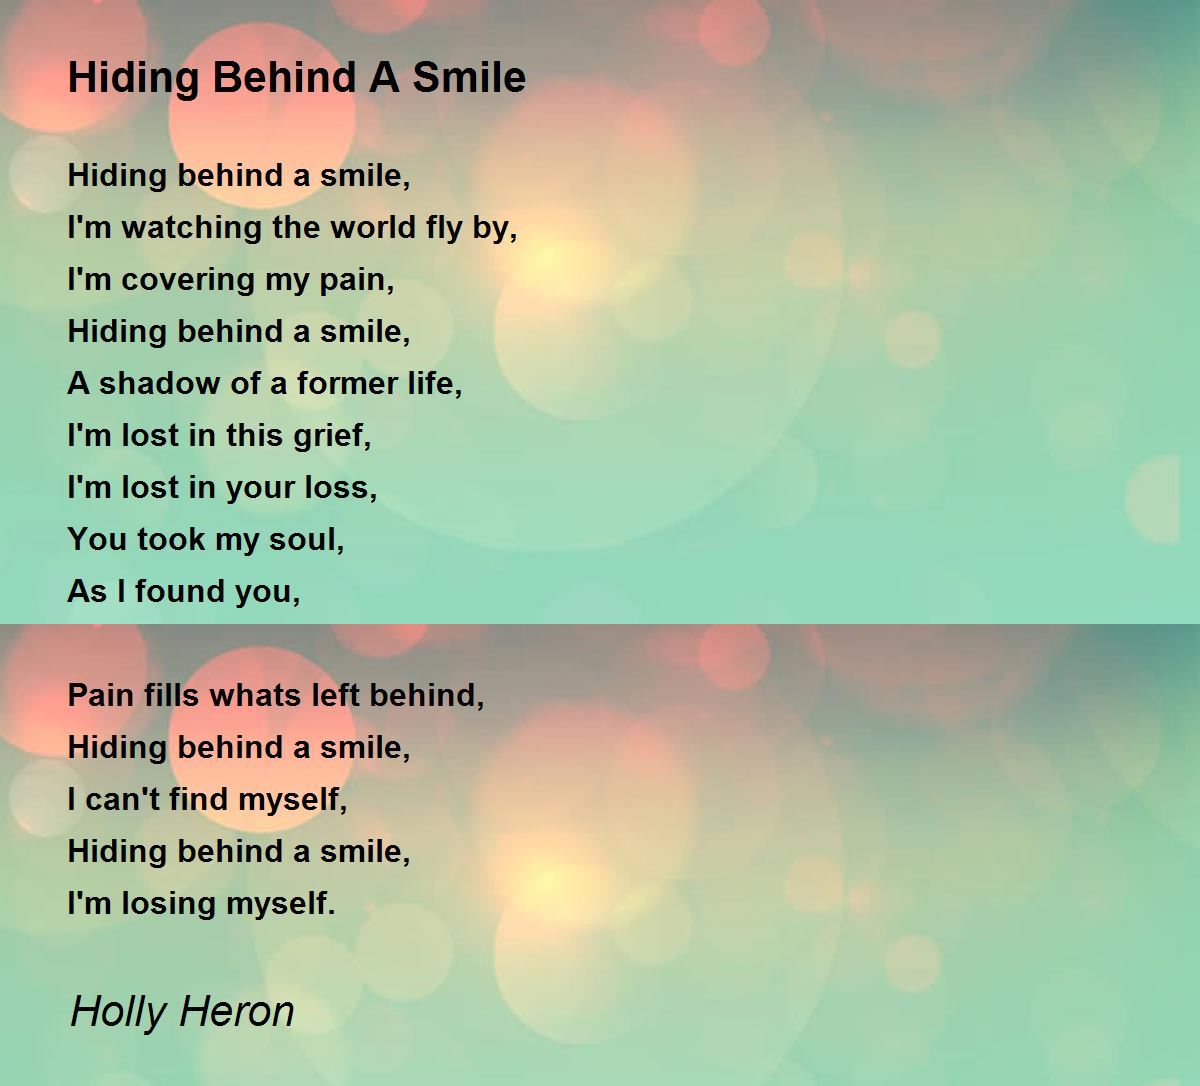 Hiding Behind A Smile - Hiding Behind A Smile Poem by Holly Heron